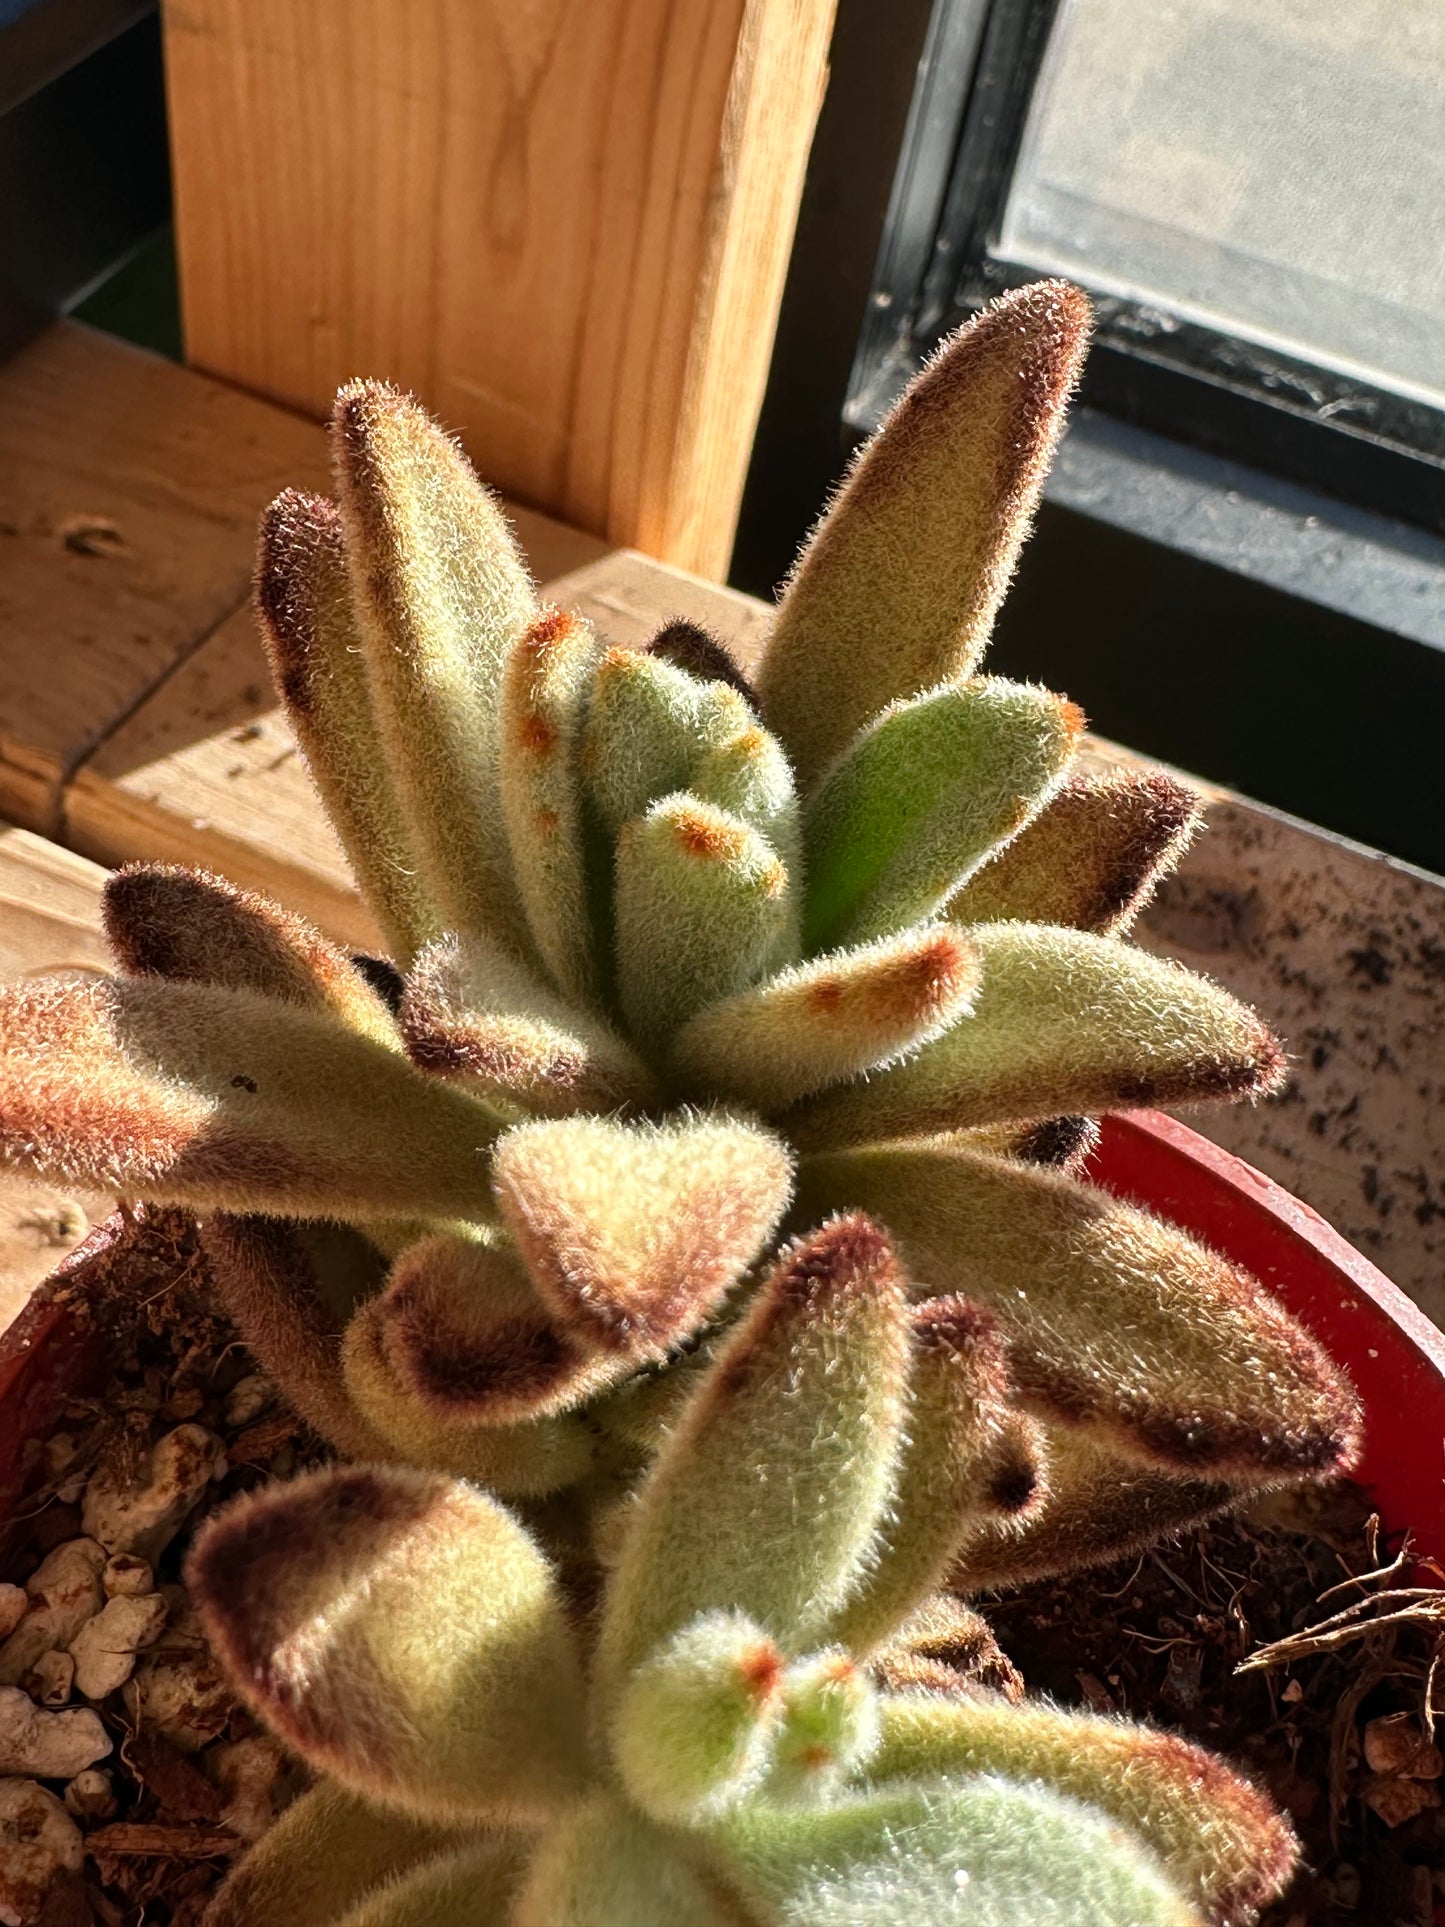 4" Kalanchoe tomentosa "Chocolate Soldier"